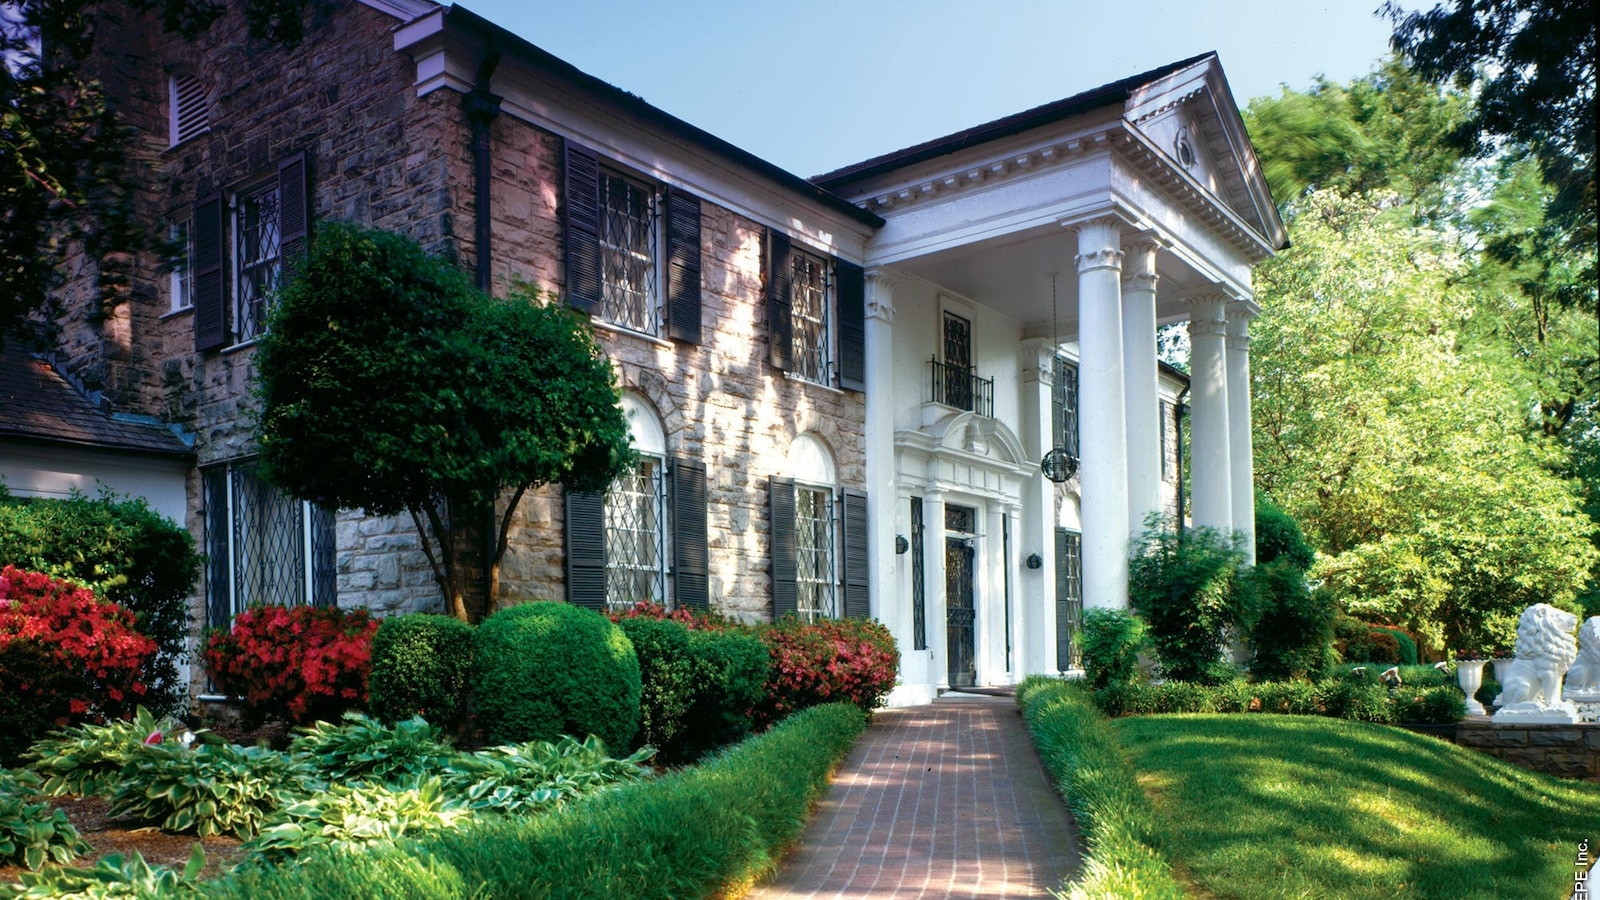 Tennessee AG turns Graceland foreclosure probe over to federal investigators